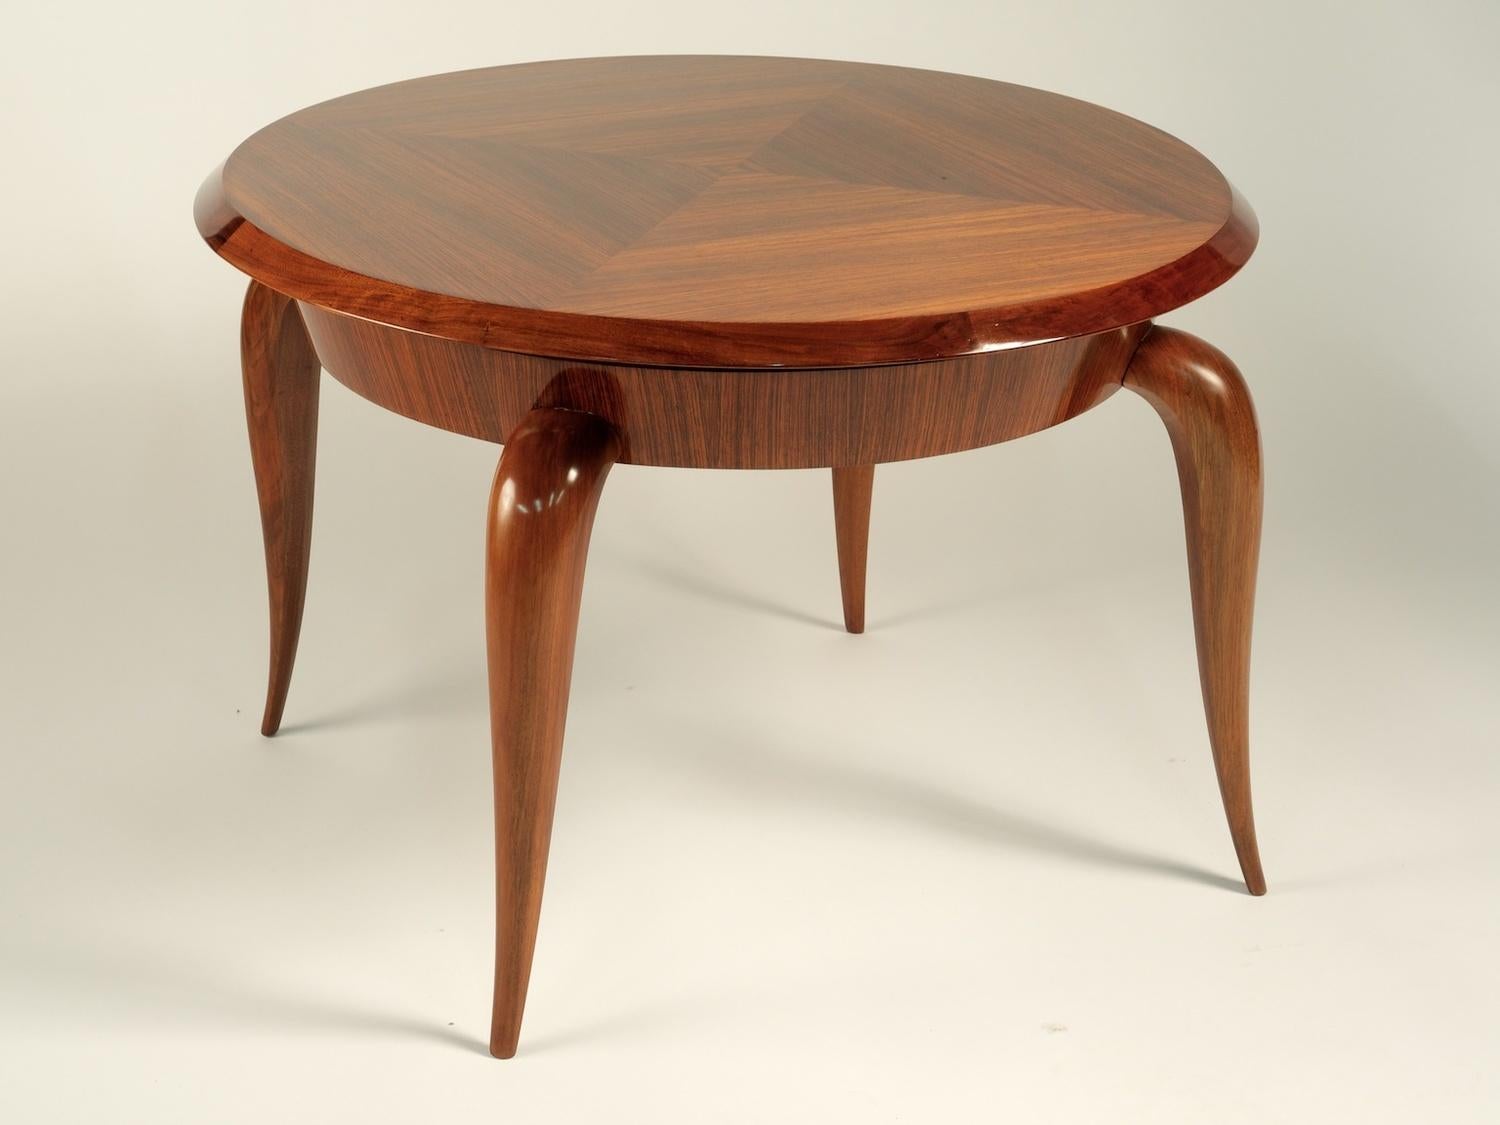 French Art Deco low side/coffee table, circa 1935 by Rene Prou, in rosewood. Measures: 32